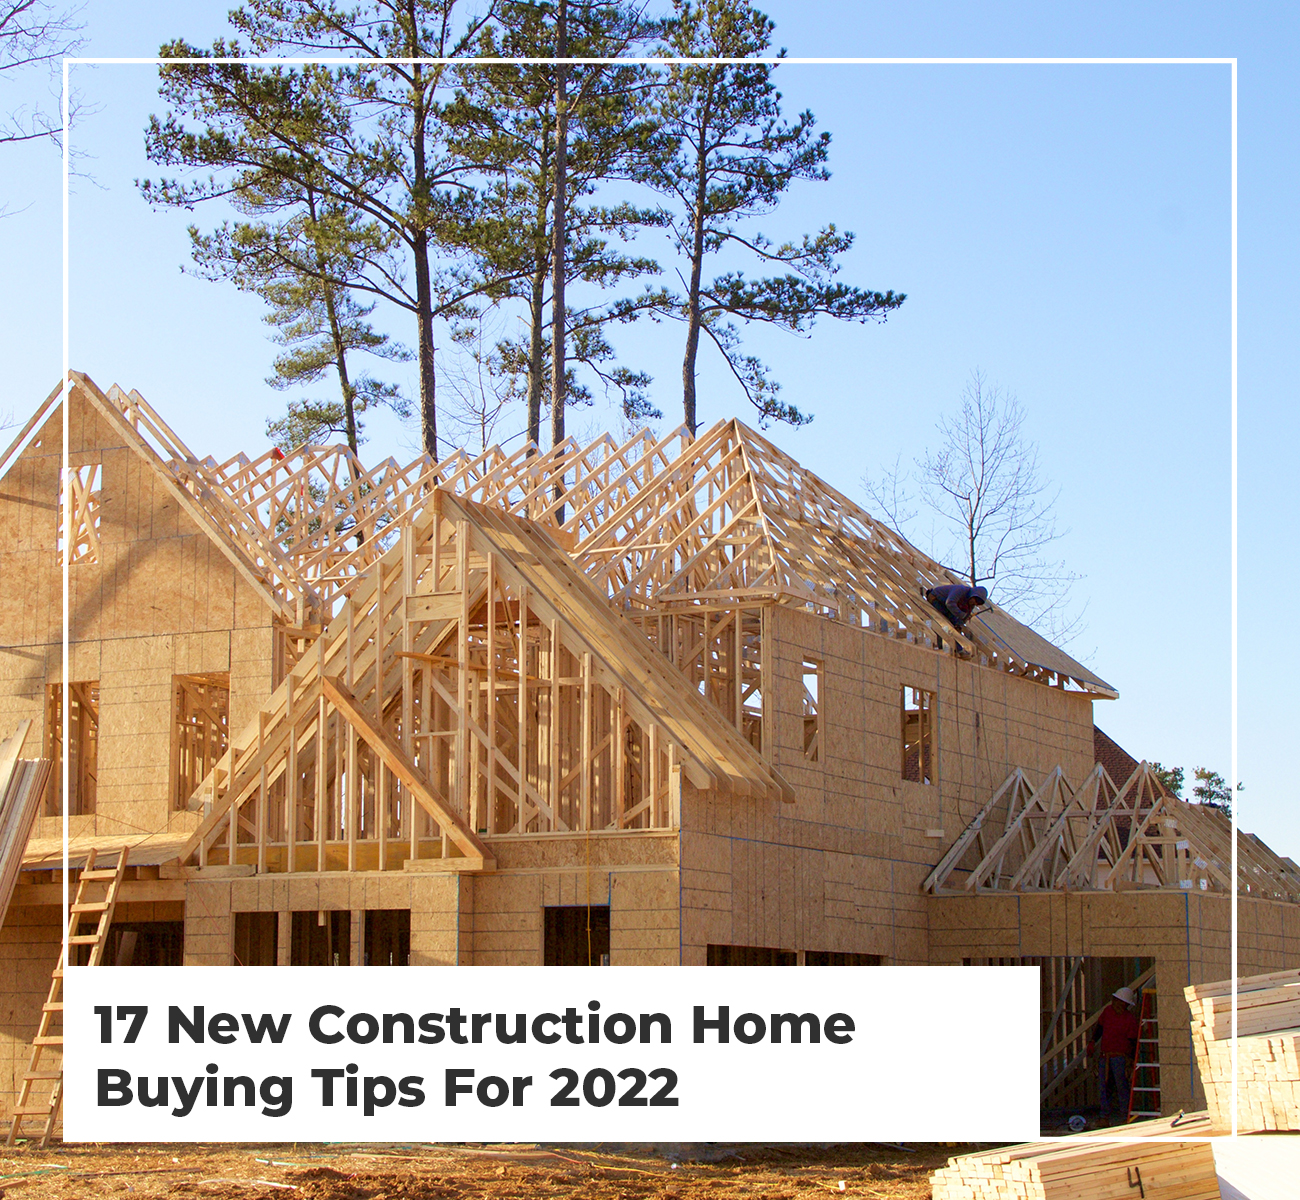 17 New Construction Home Buying Tips For 2022